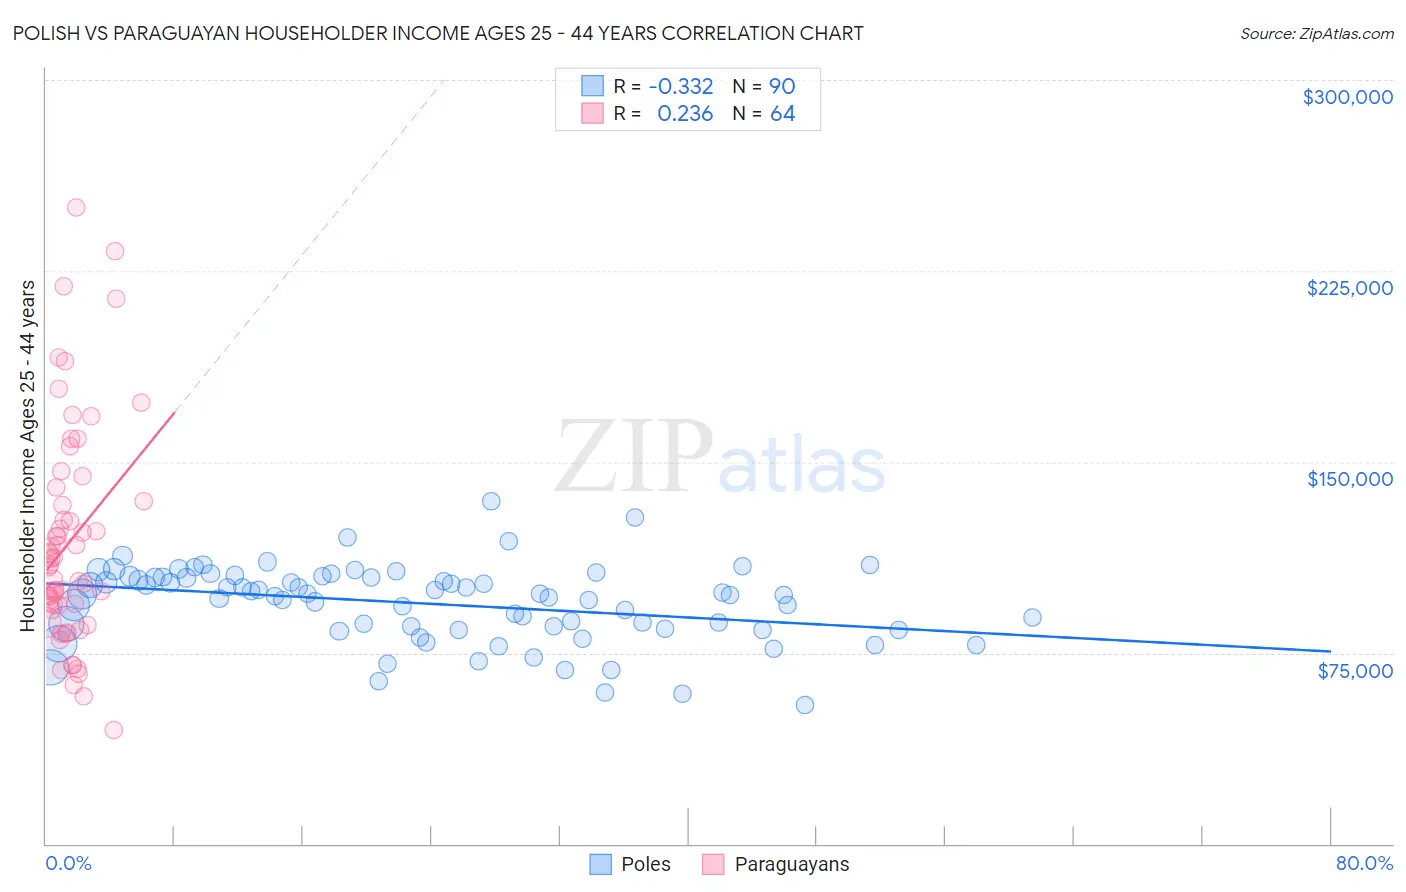 Polish vs Paraguayan Householder Income Ages 25 - 44 years